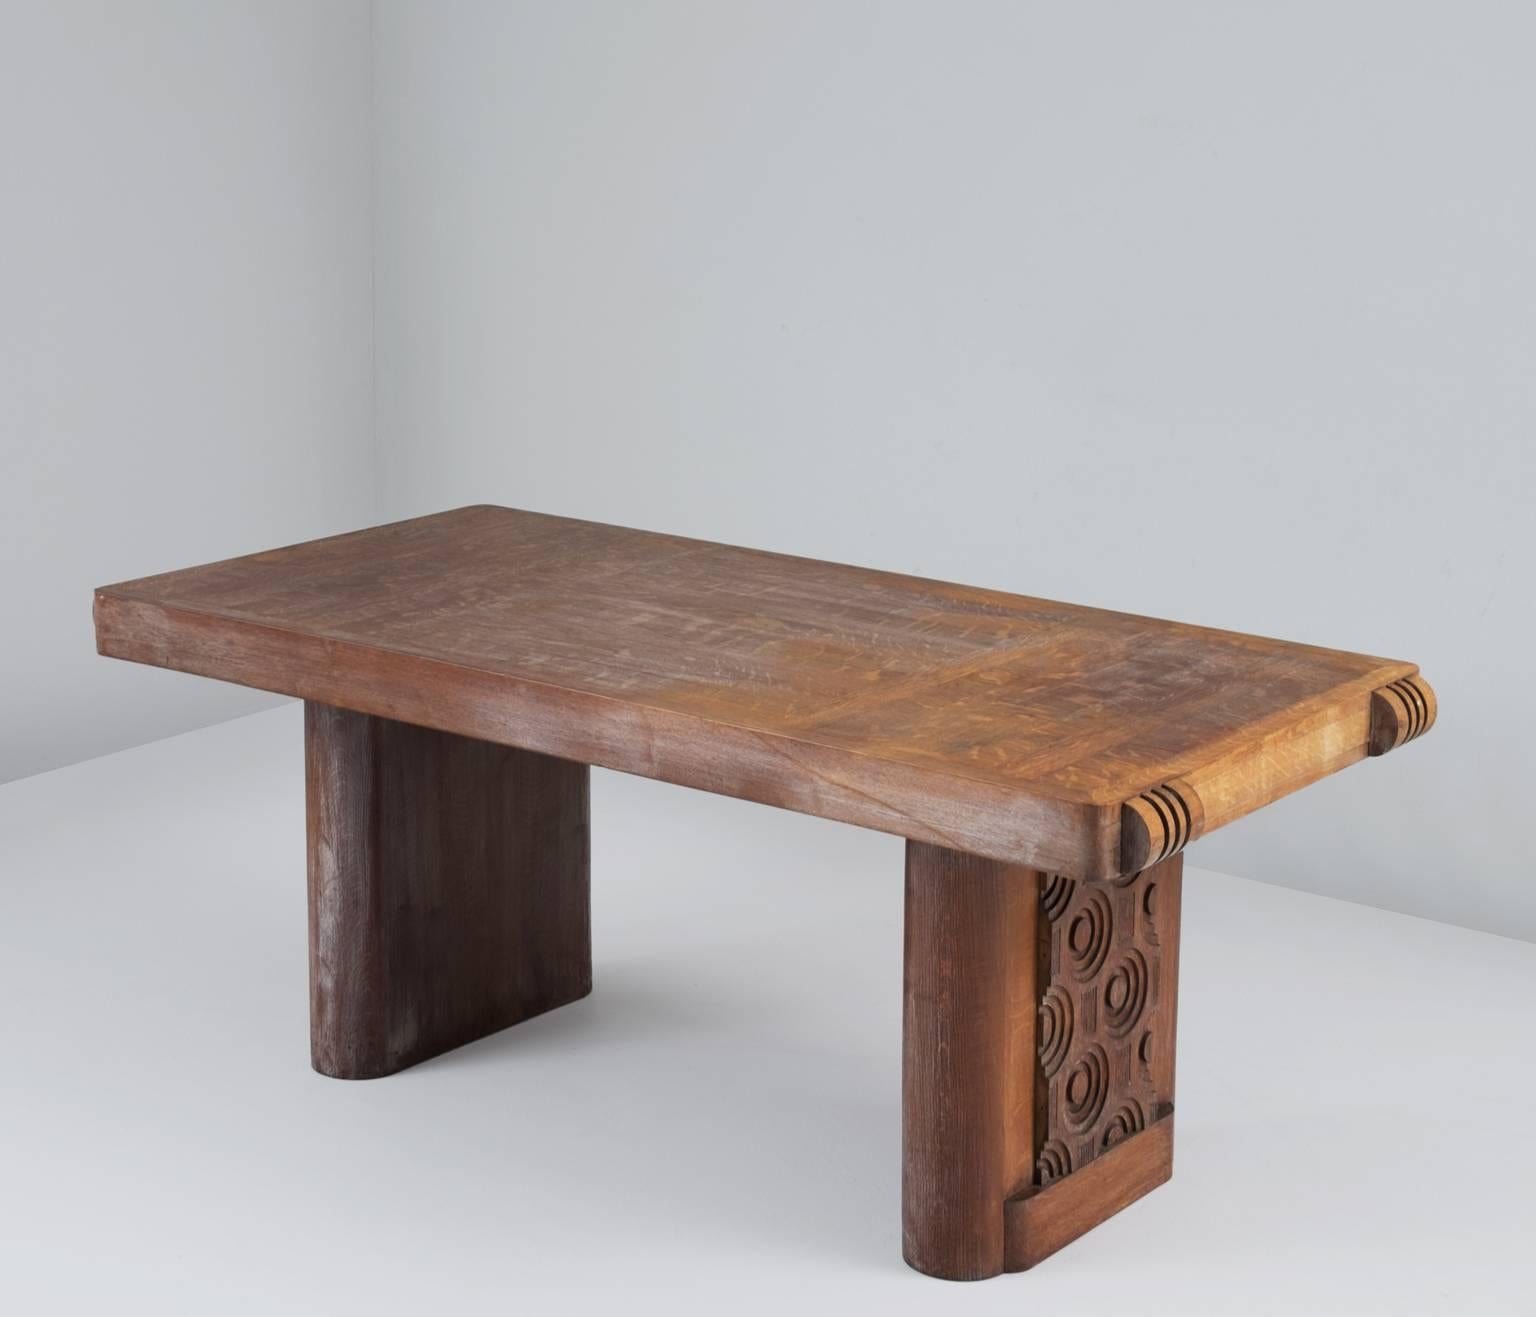 Charles Dudouyt dining table in oak, France, 1930s.

This high quality table, made of oak, has been made with a wonderful detailed wooden inlay pattern on top, showing great craftsmanship, the top simply is spectacular. It is in a beautifully aged